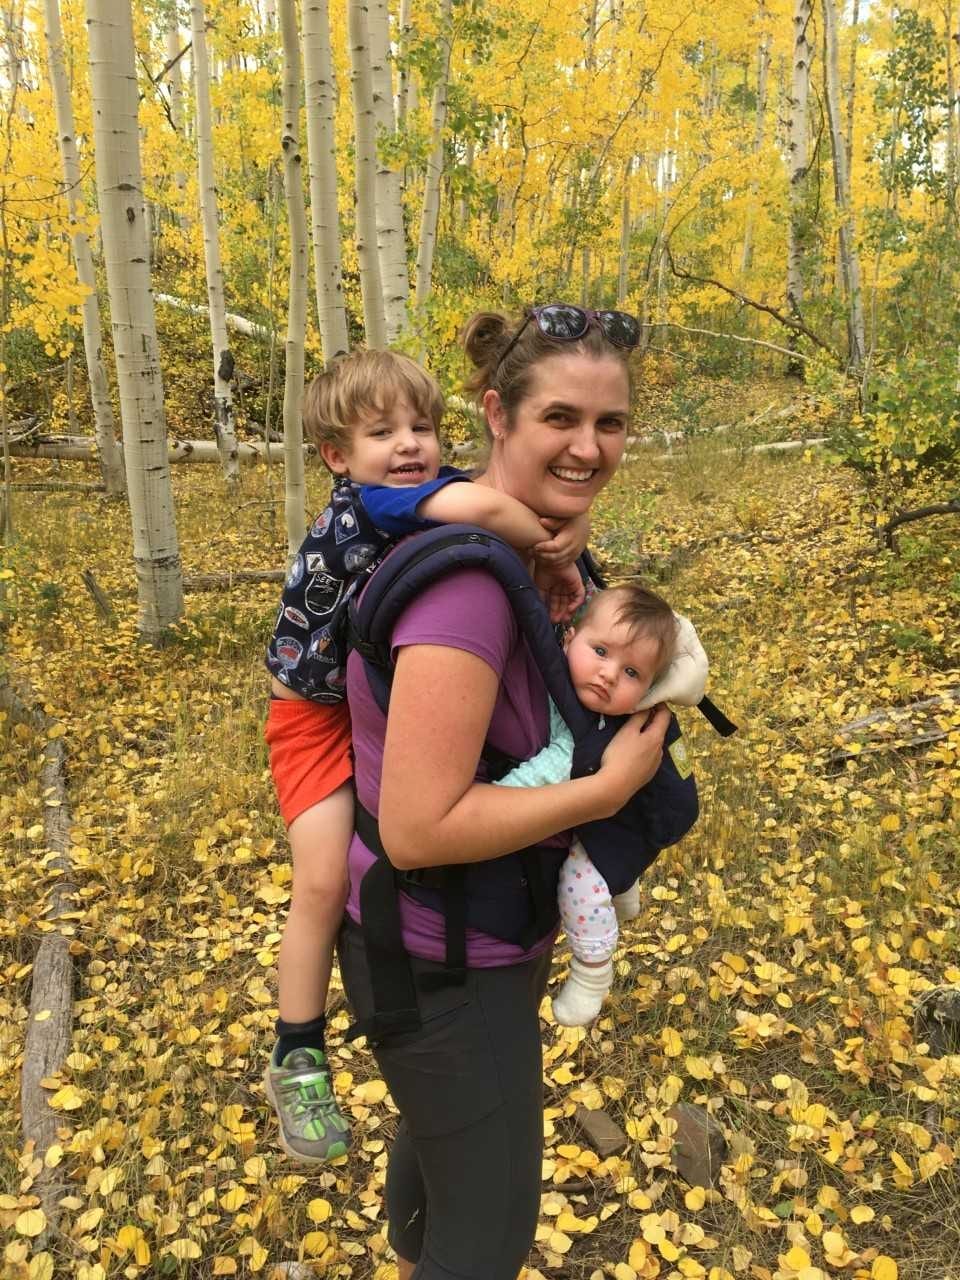 Lauren Watel carrying her two children while hiking in the forest.